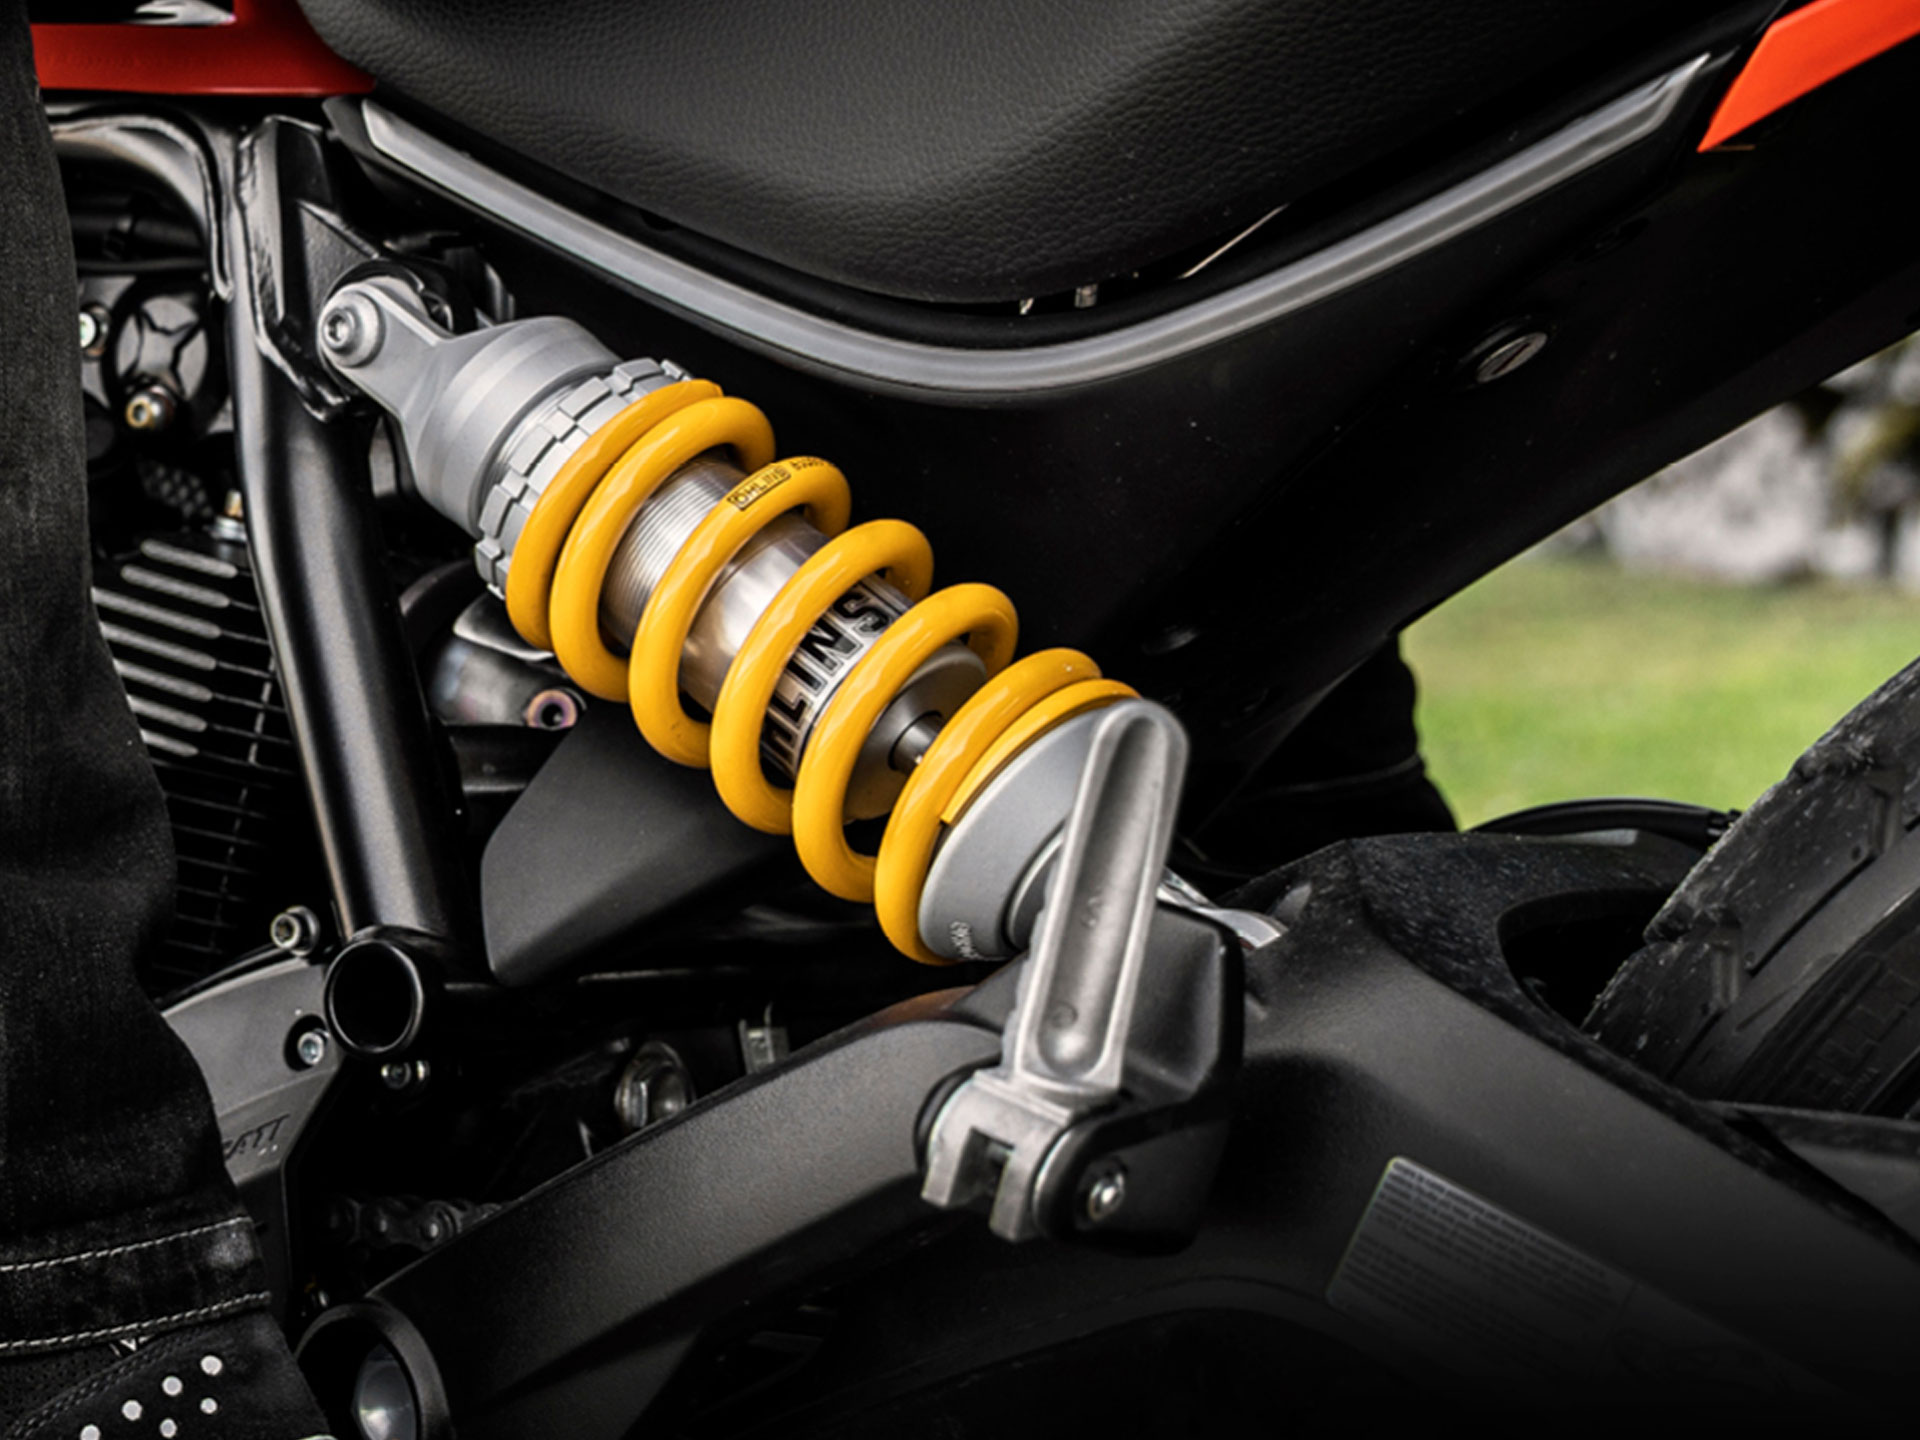 Ohlins shock absorber on a motorcycle